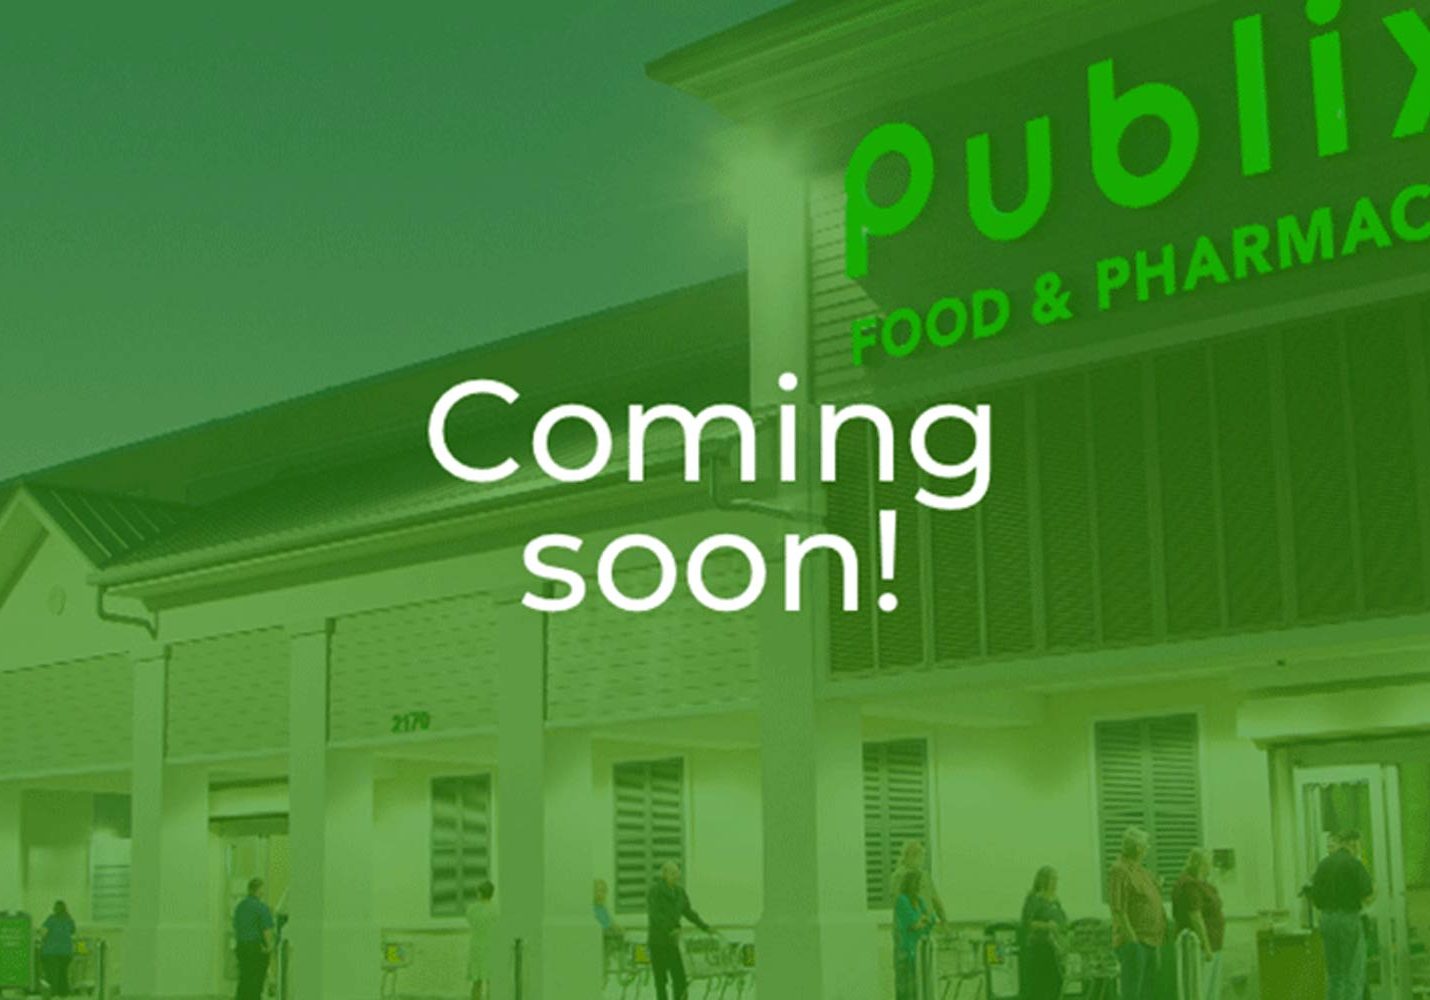 West Mobile Publix Sets New Grand Opening Date